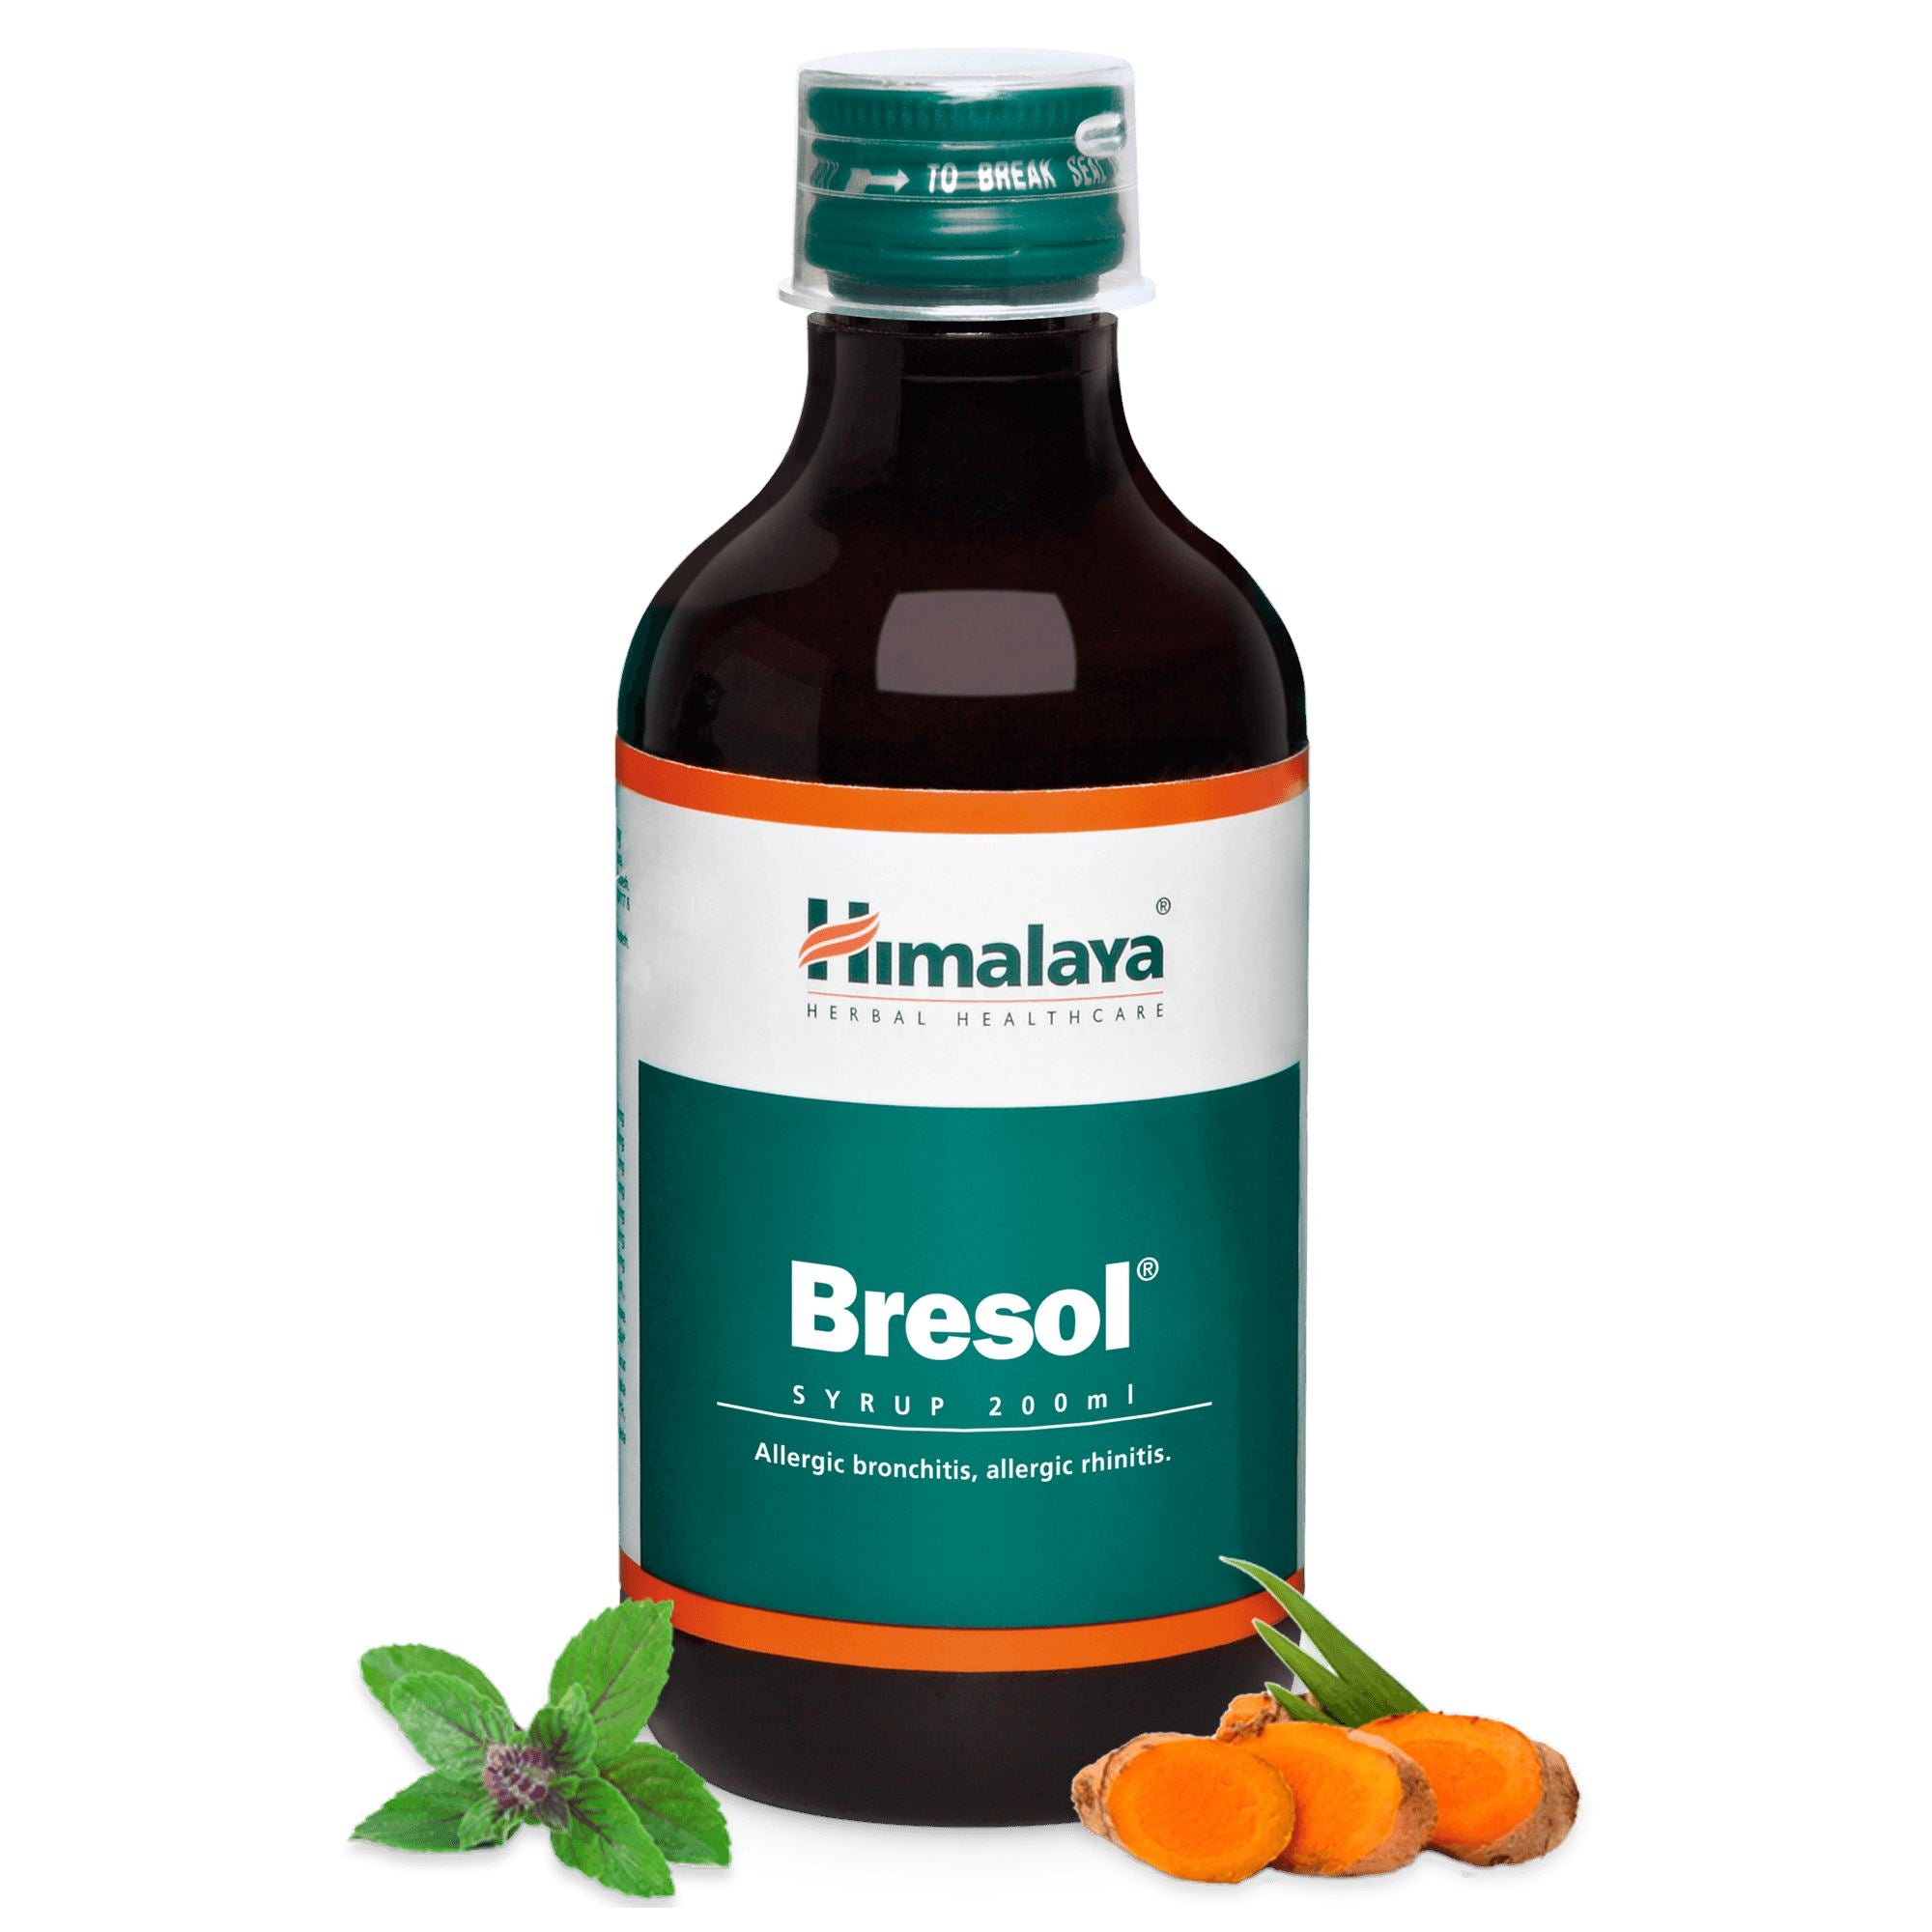 Himalaya Bresol Syrup - Syrup to fight respiratory diseases